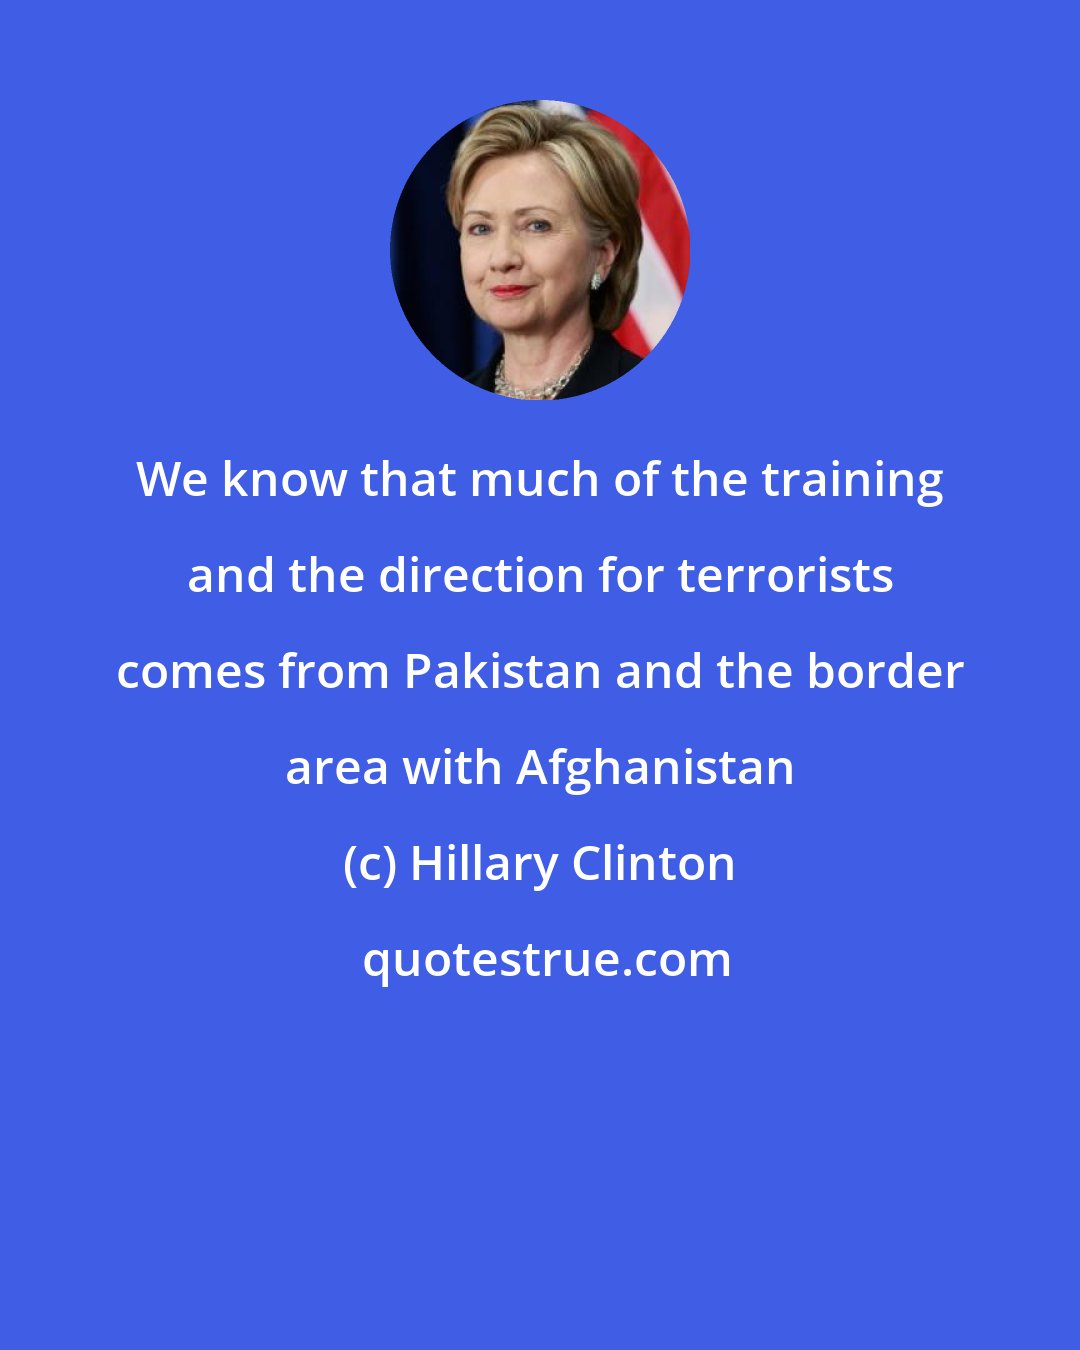 Hillary Clinton: We know that much of the training and the direction for terrorists comes from Pakistan and the border area with Afghanistan